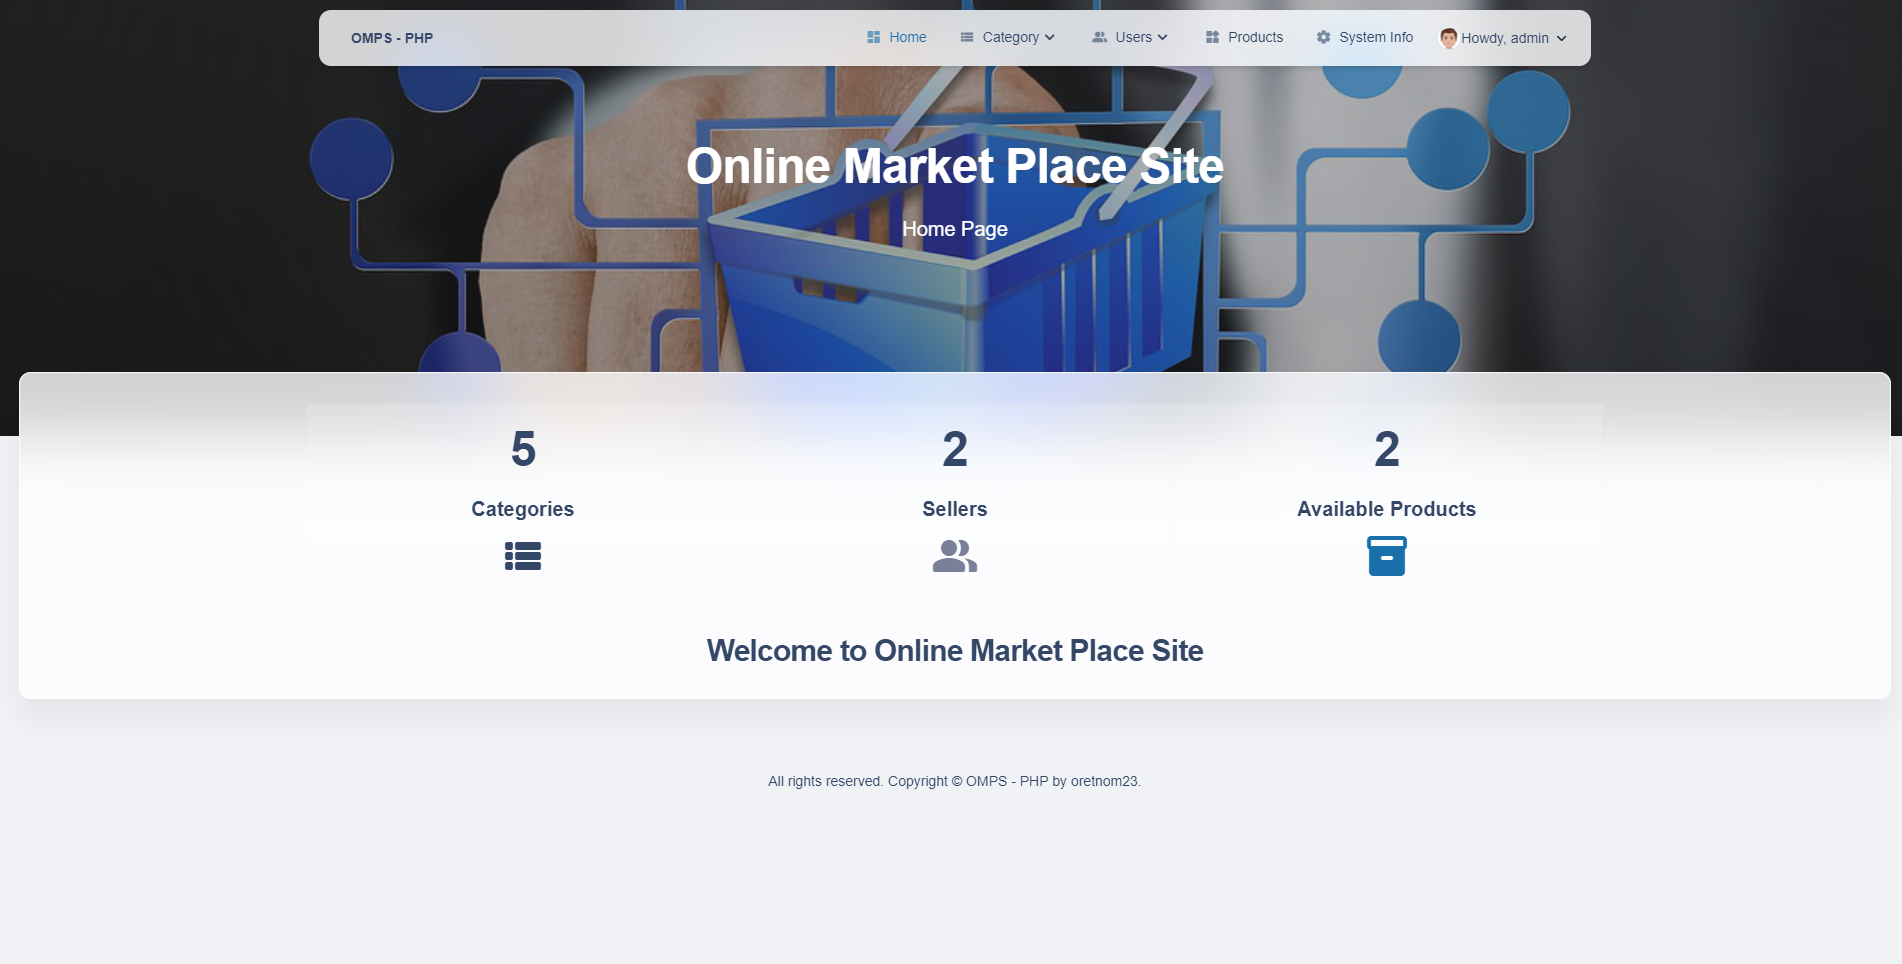 Online Market Place Site in PHP